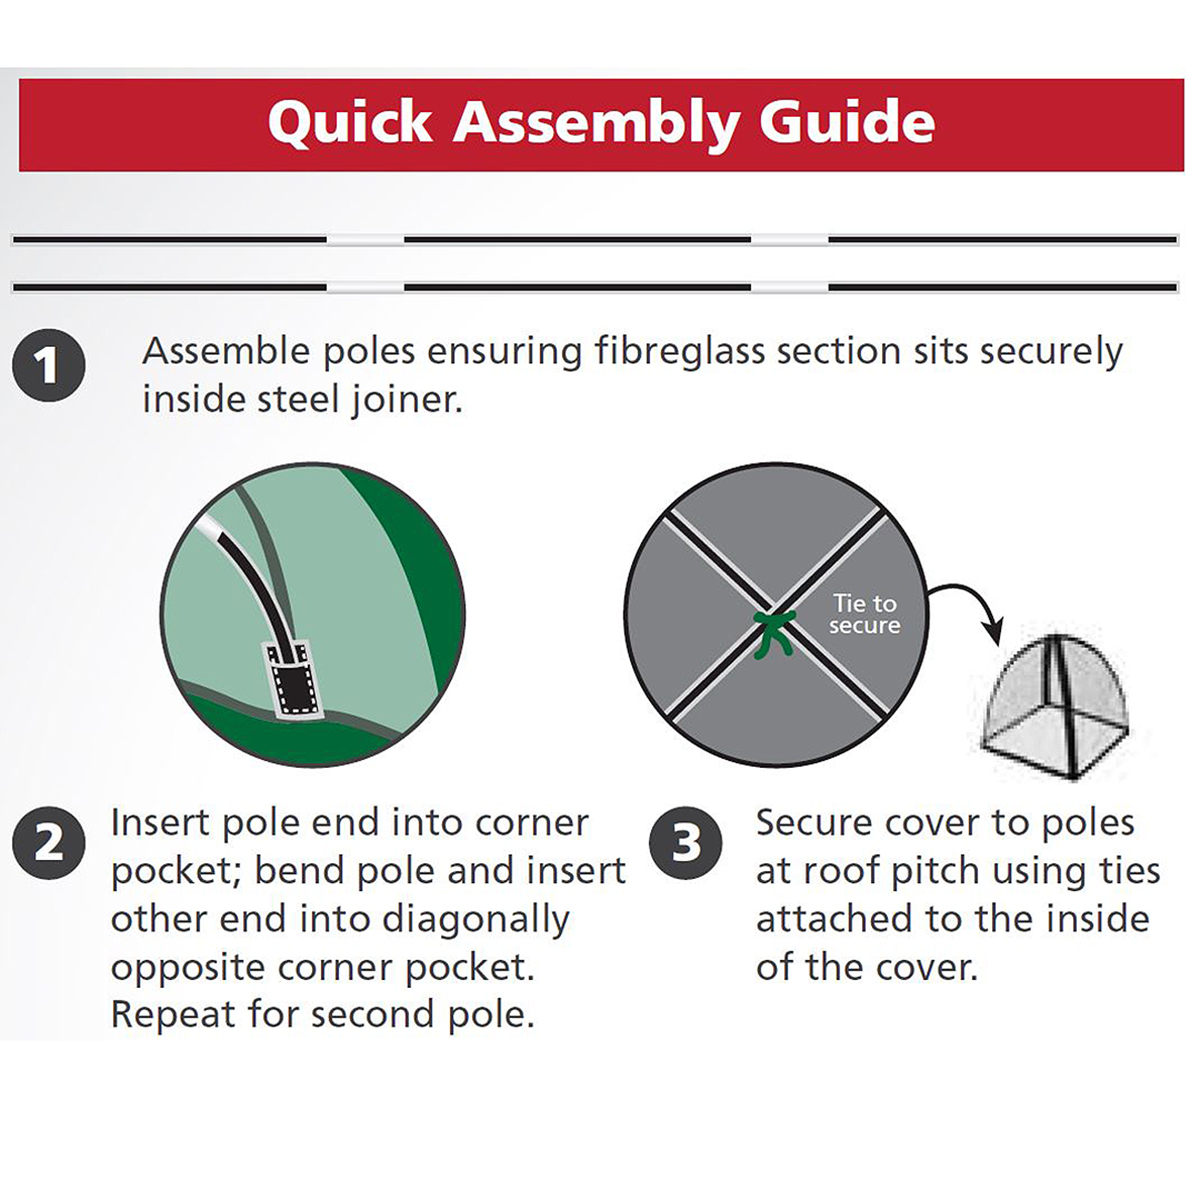 14392 - Pest Protect assembly guide